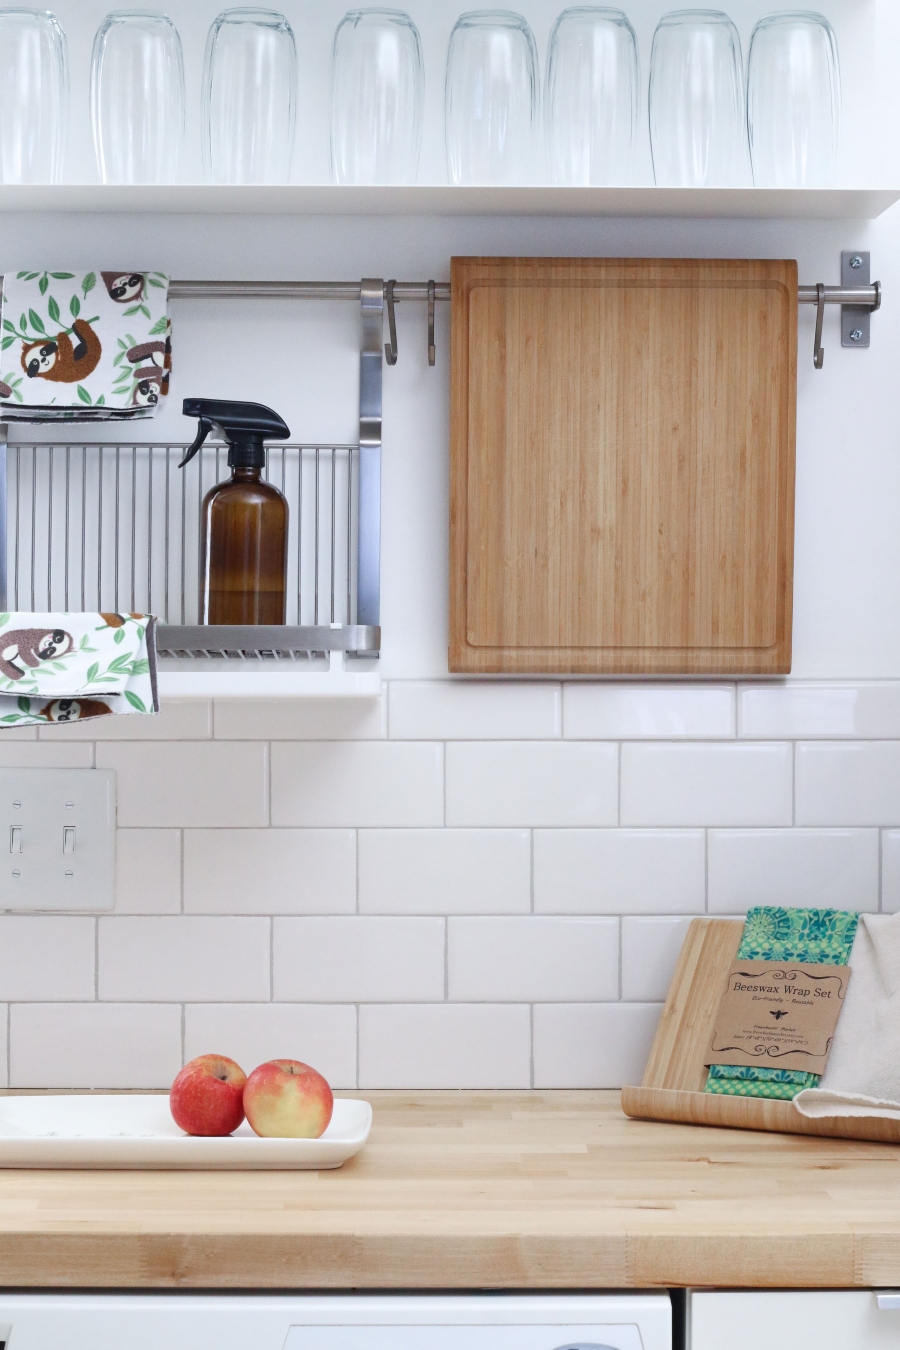 How to Make Your Kitchen Appliances and Decor Match